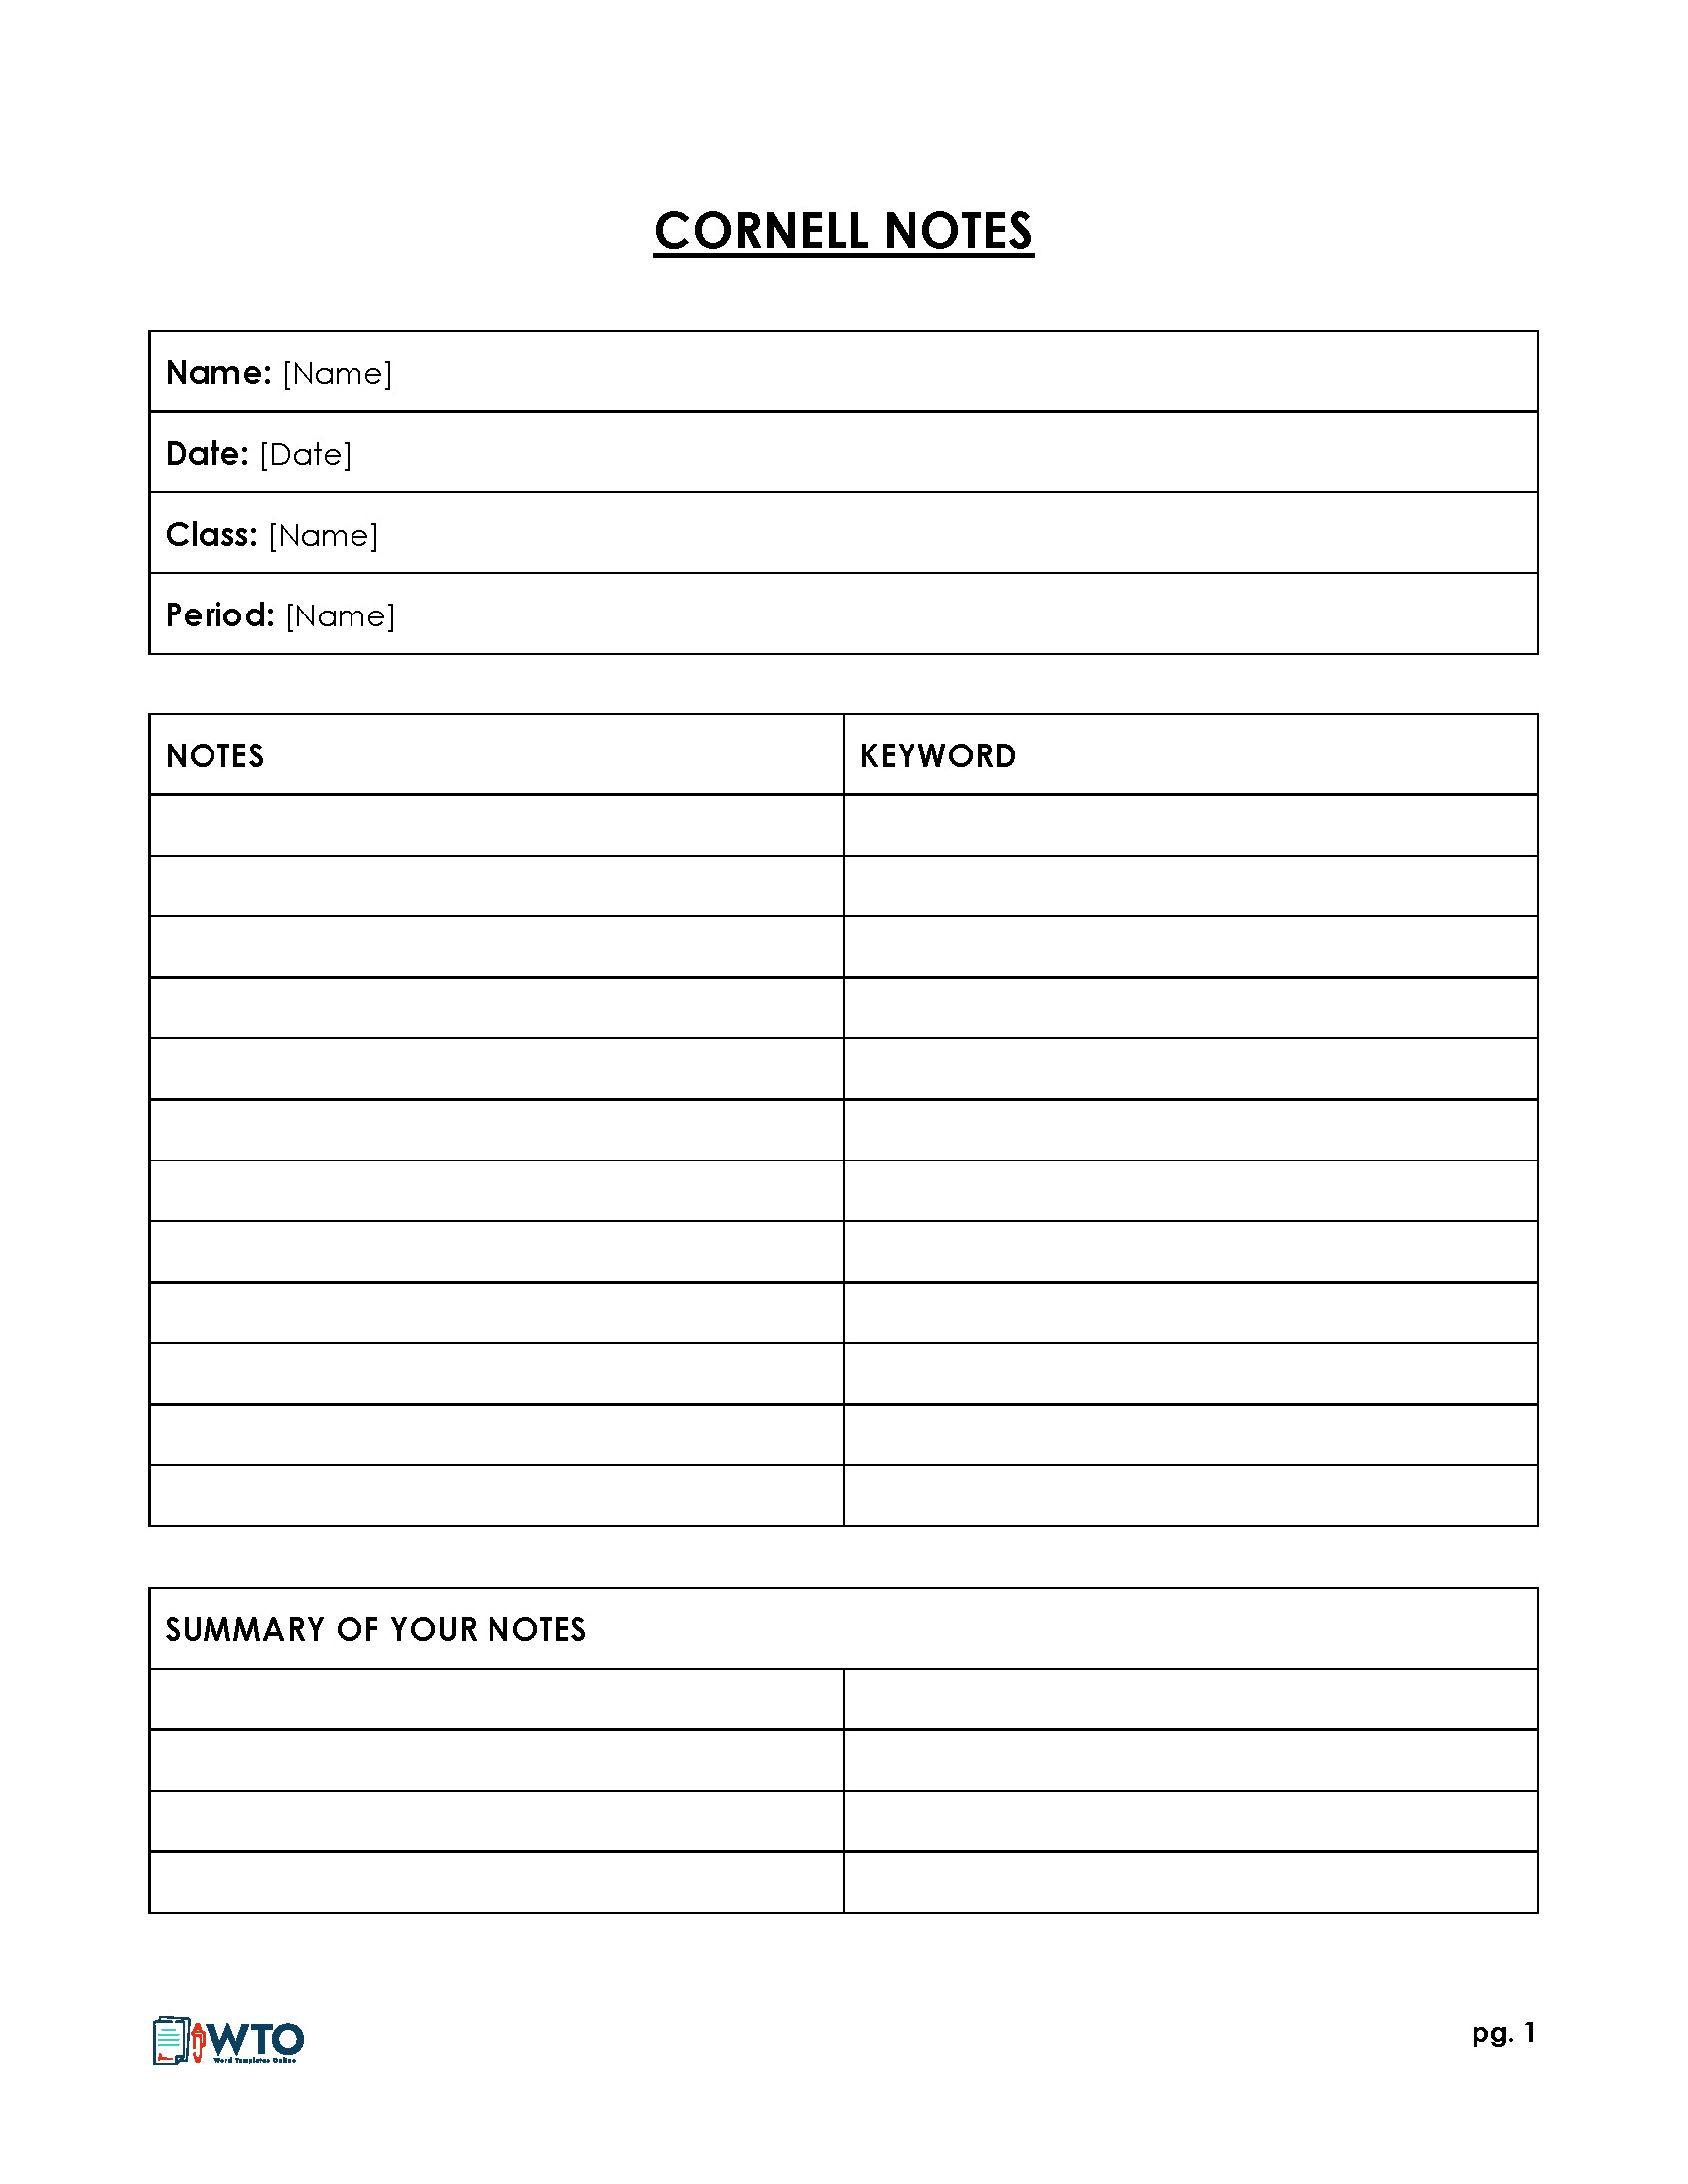 64-free-cornell-note-templates-cornell-note-taking-explained